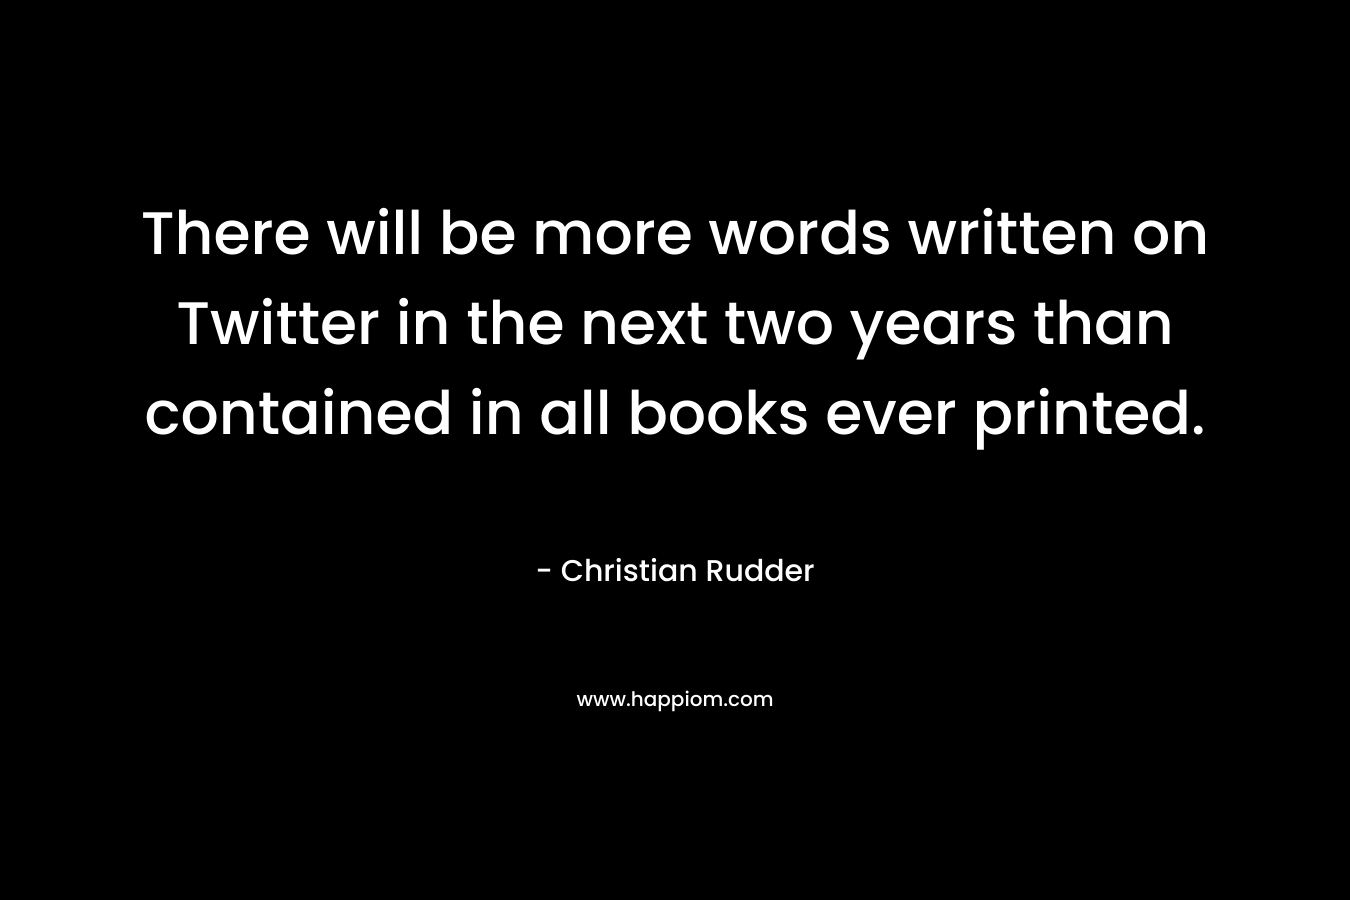 There will be more words written on Twitter in the next two years than contained in all books ever printed. – Christian Rudder